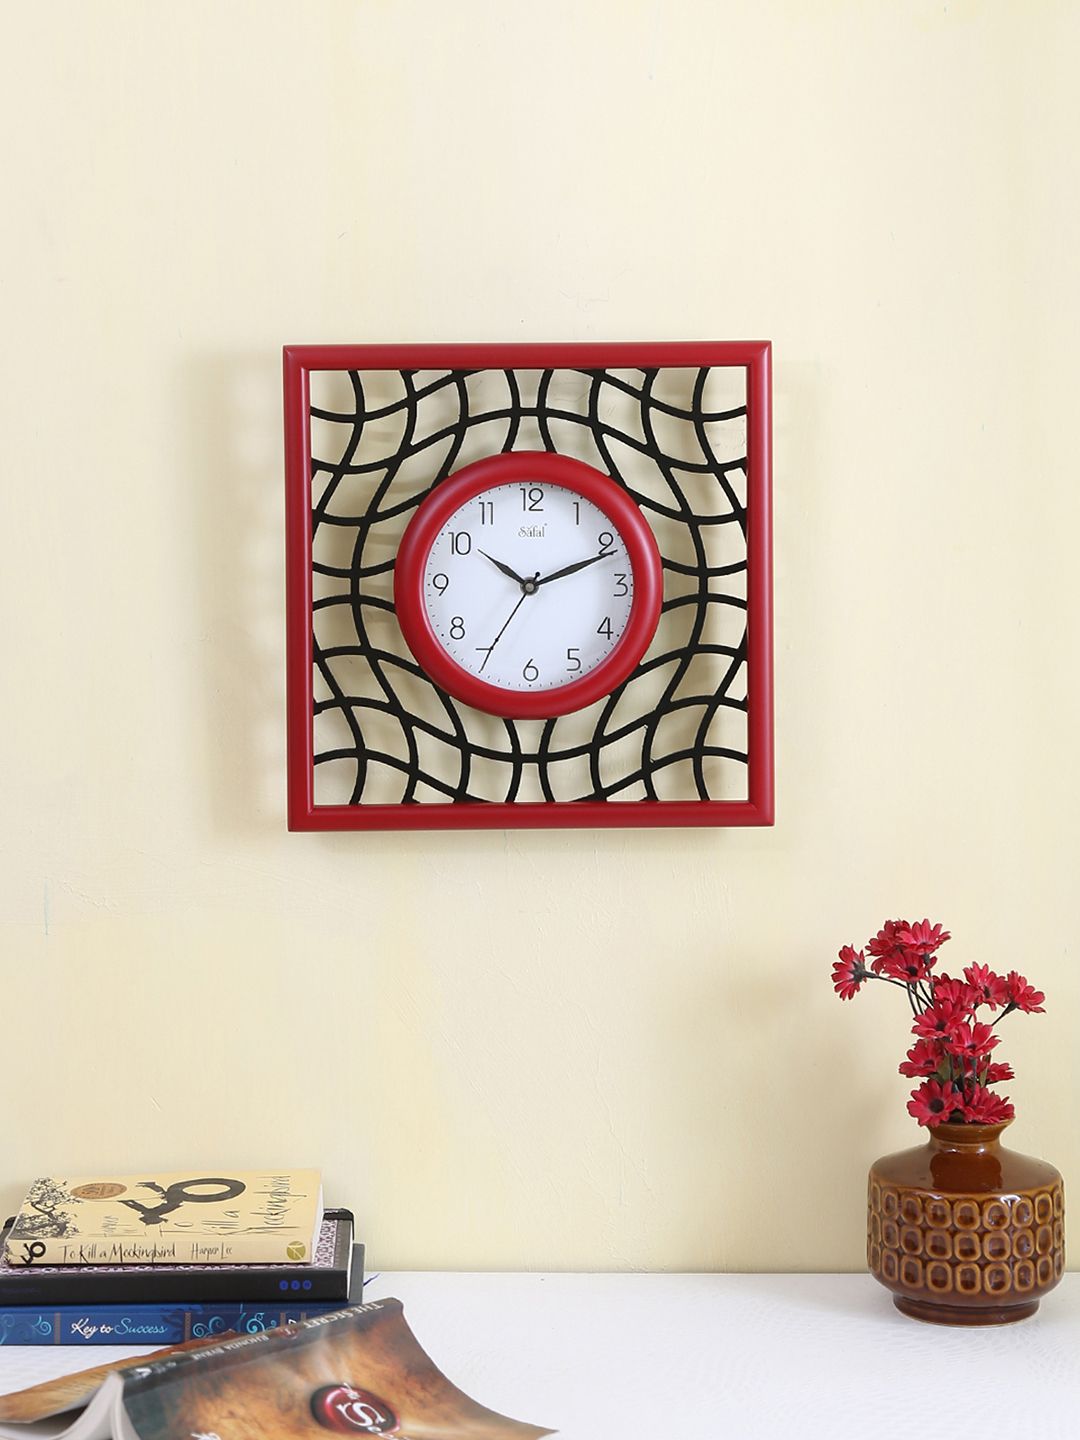 Safal White Solid Dial Square Analogue Wall Clock Price in India